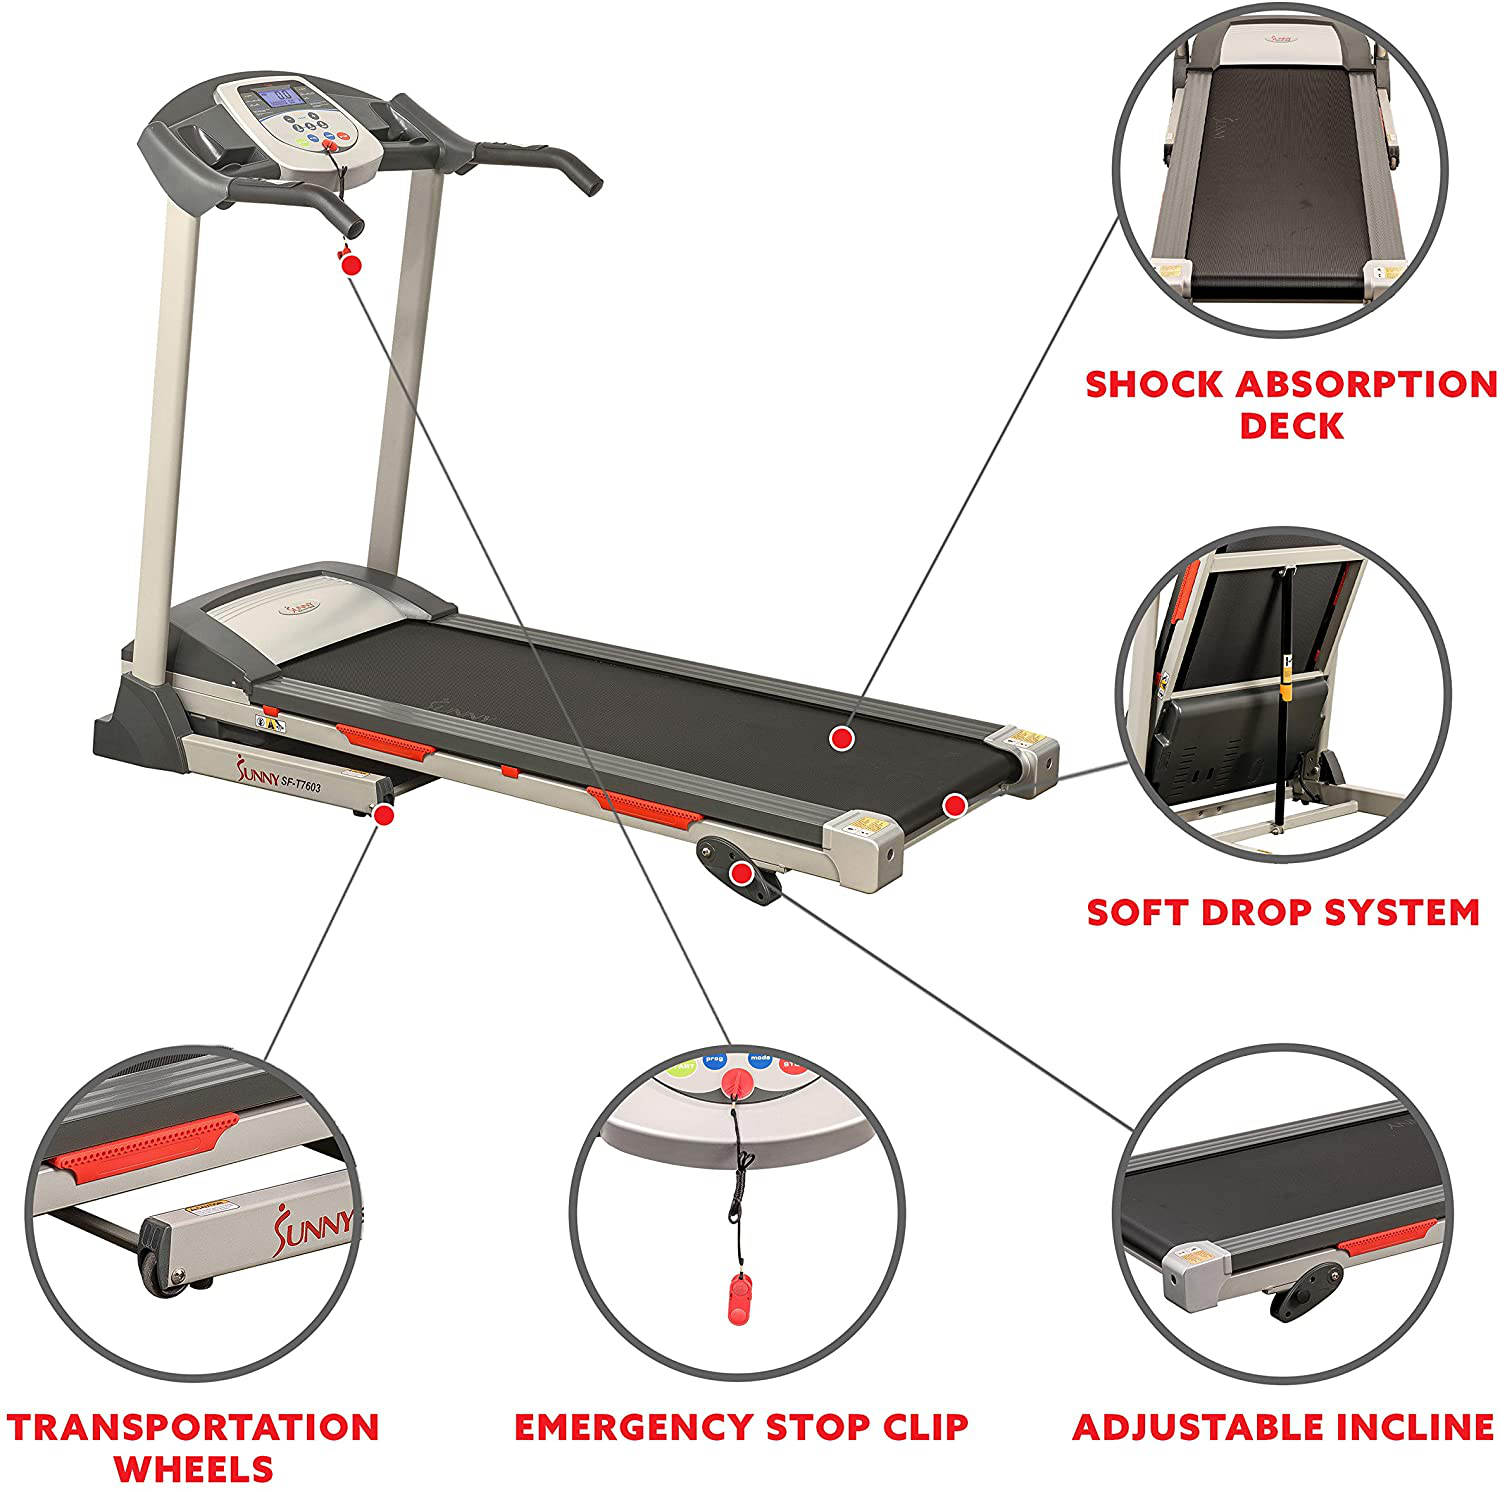 Sunny Health & Fitness Exercise Treadmills, Motorized Running Machine for Home with Folding, Easy Assembly, Sturdy, Portable and Space Saving - SF-T7603, Grey Animals & Pet Supplies > Pet Supplies > Dog Supplies > Dog Treadmills Sunny Health & Fitness   